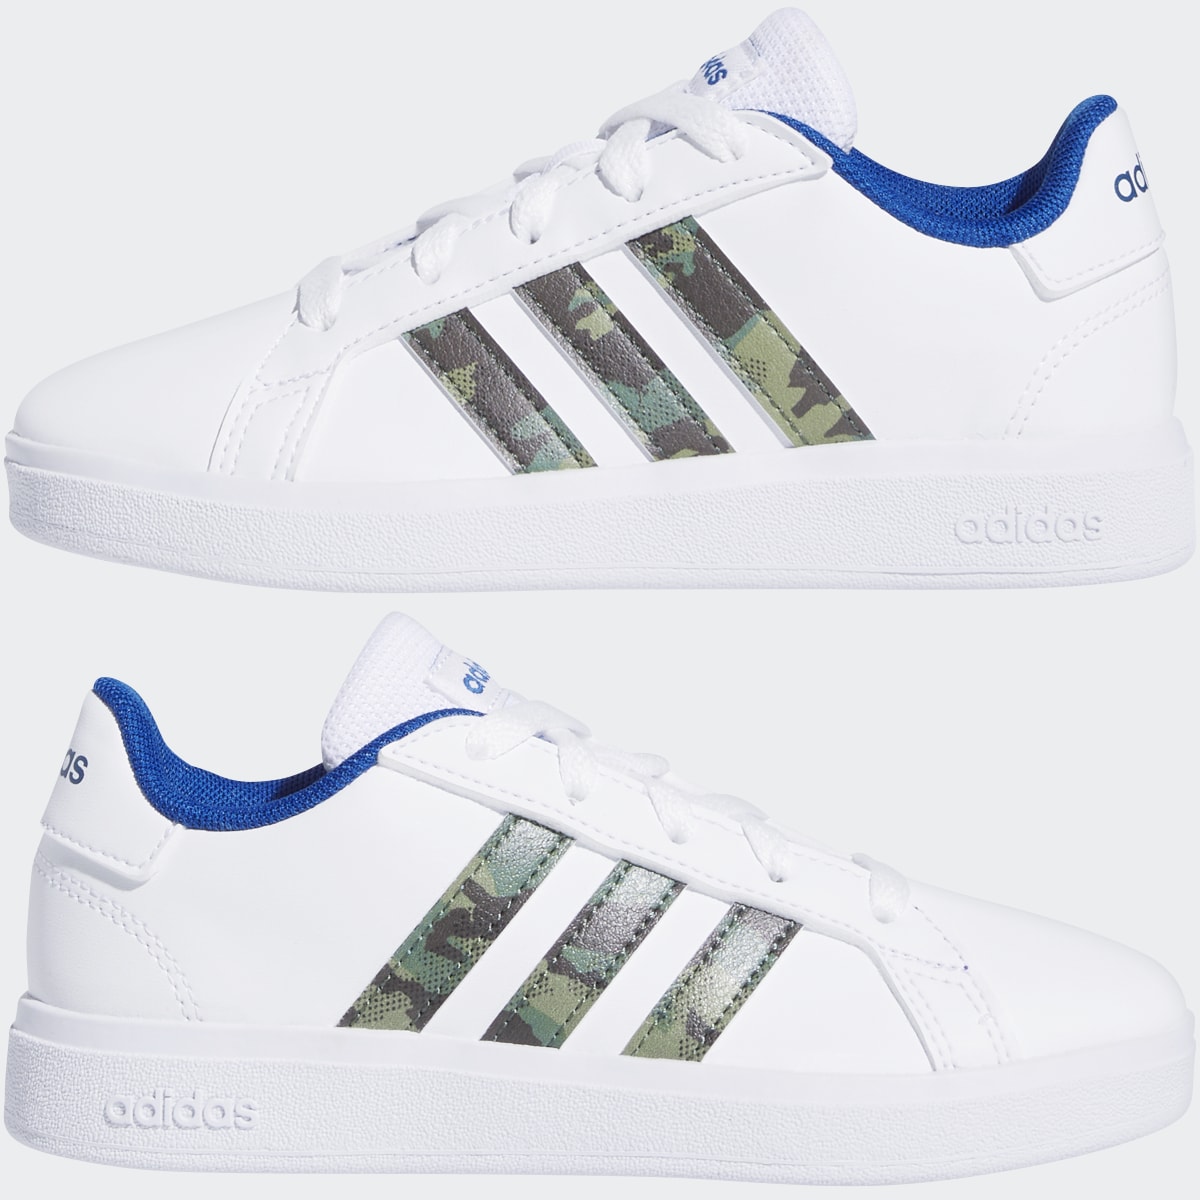 Adidas Grand Court Lifestyle Lace Tennis Schuh. 8